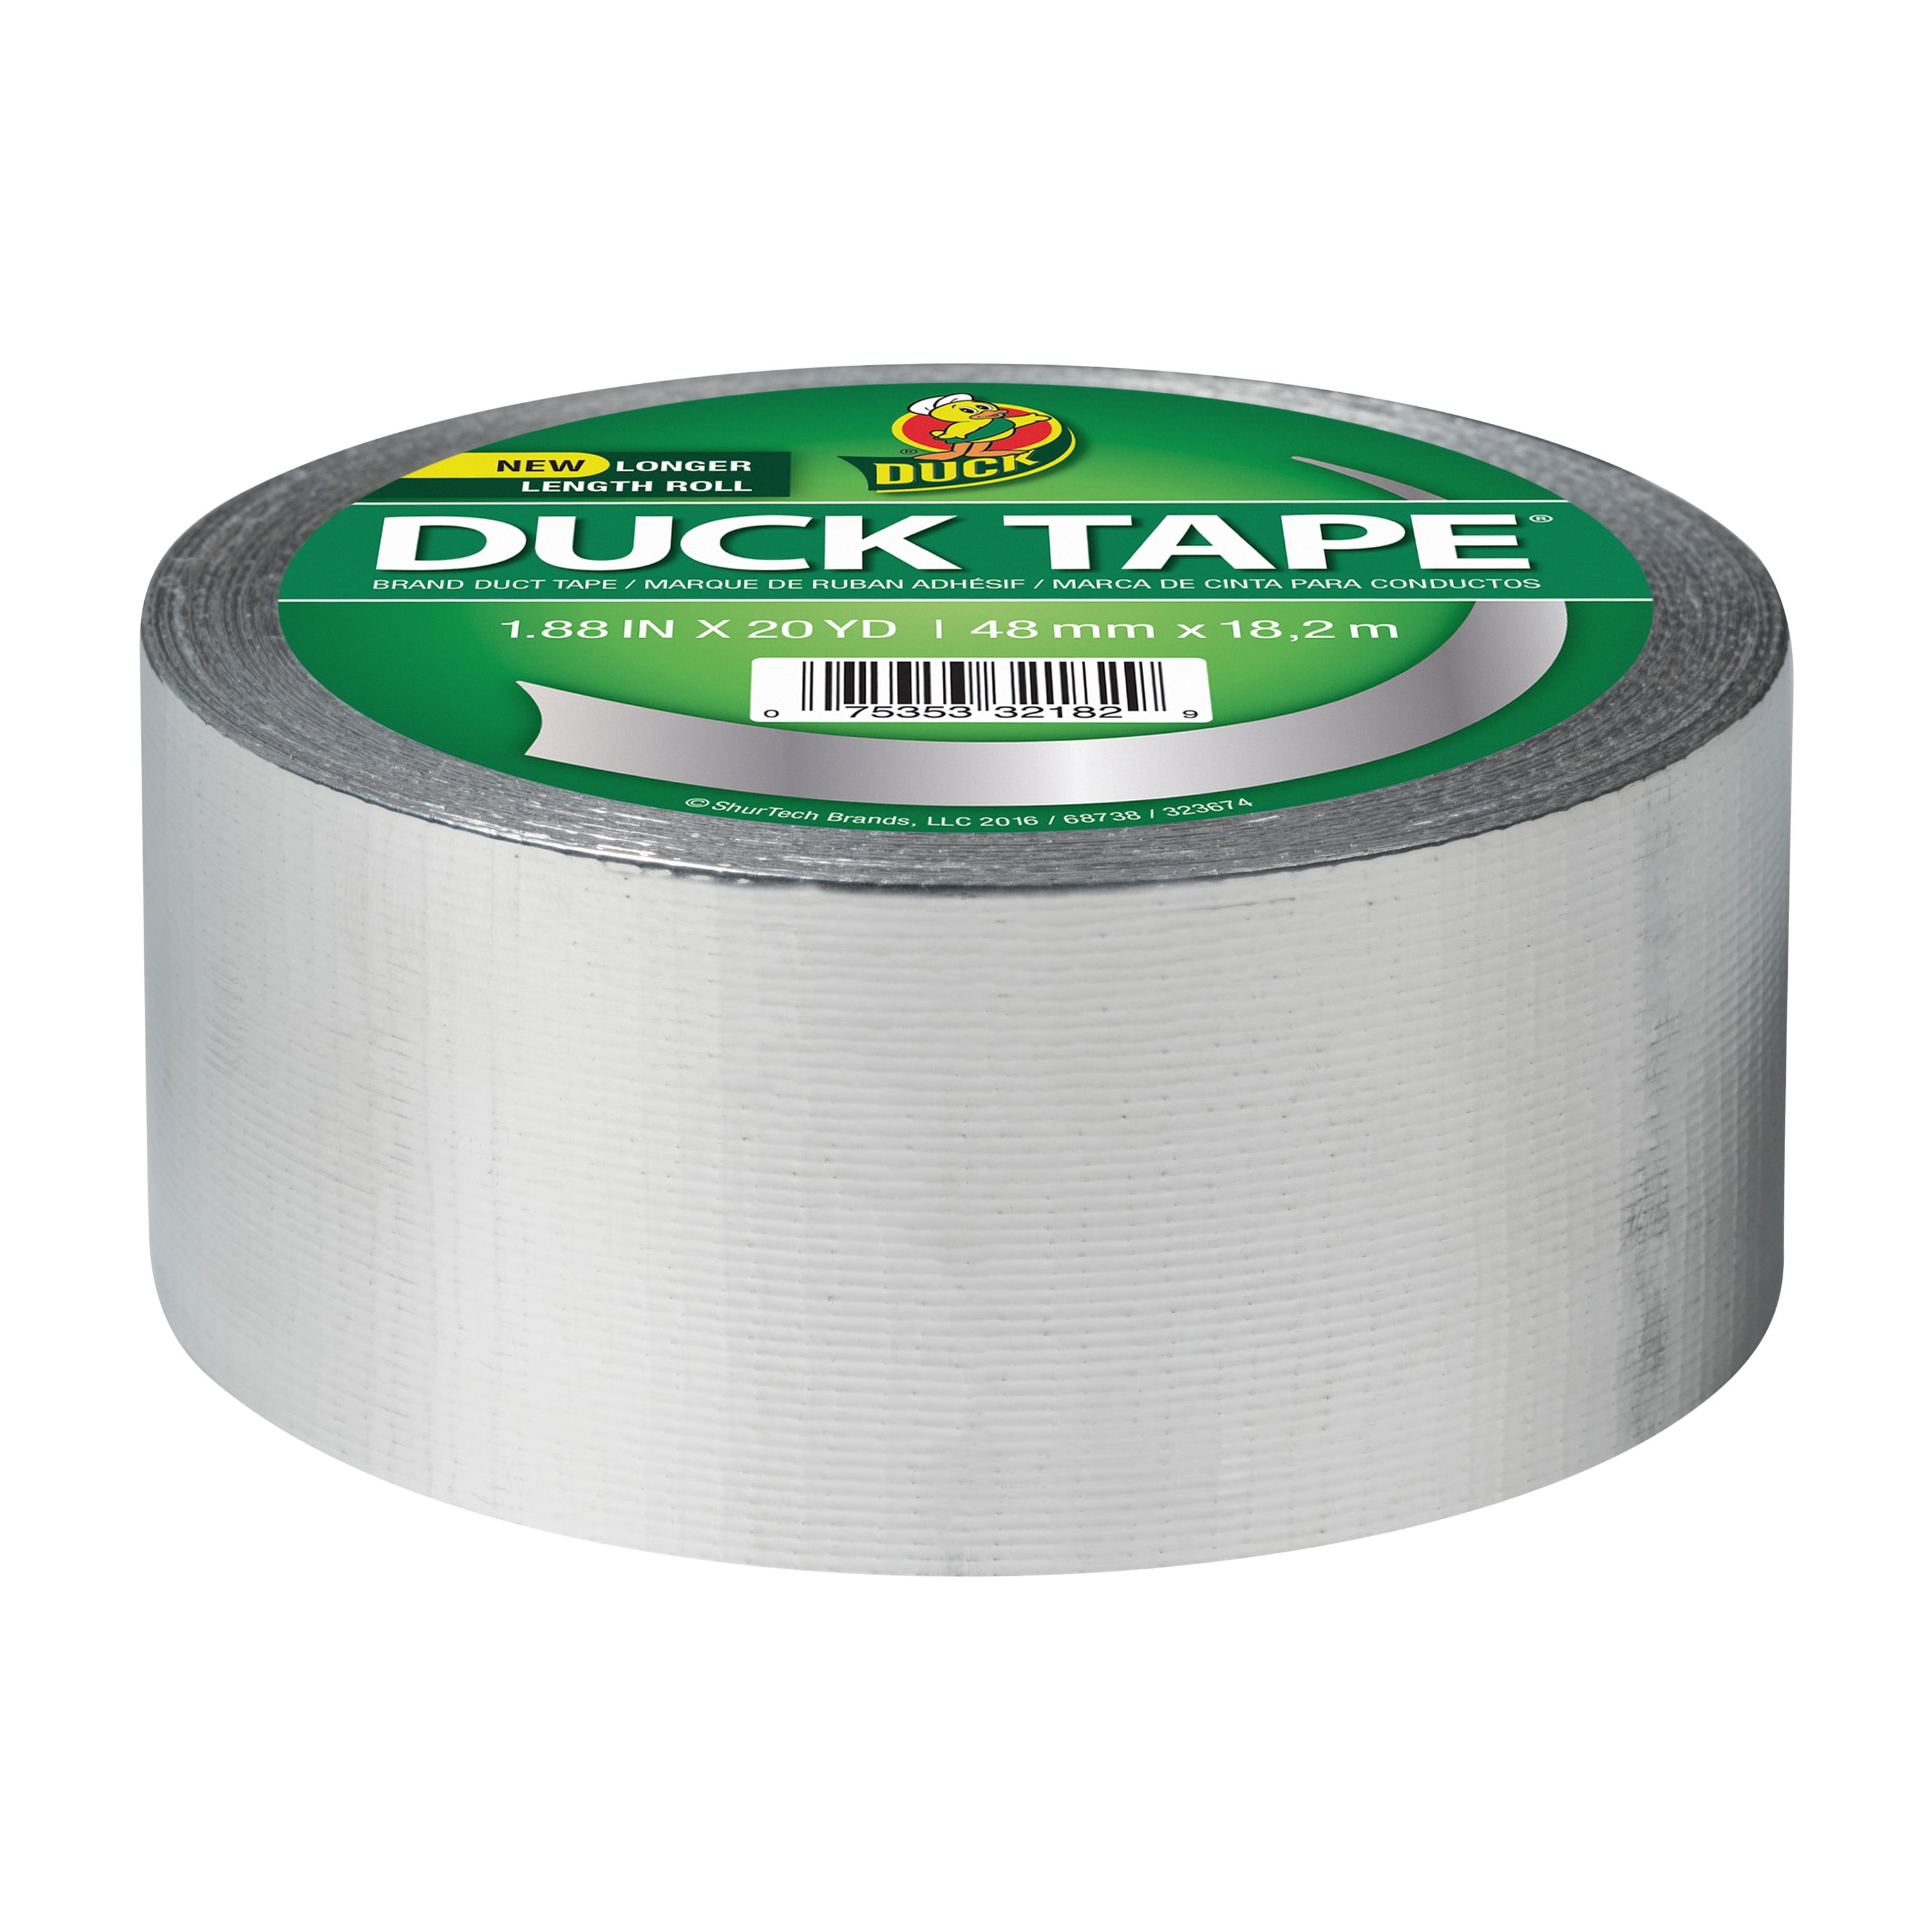 Duck Brand 1.88 in. x 20 yd. Chrome Colored Duct Tape 